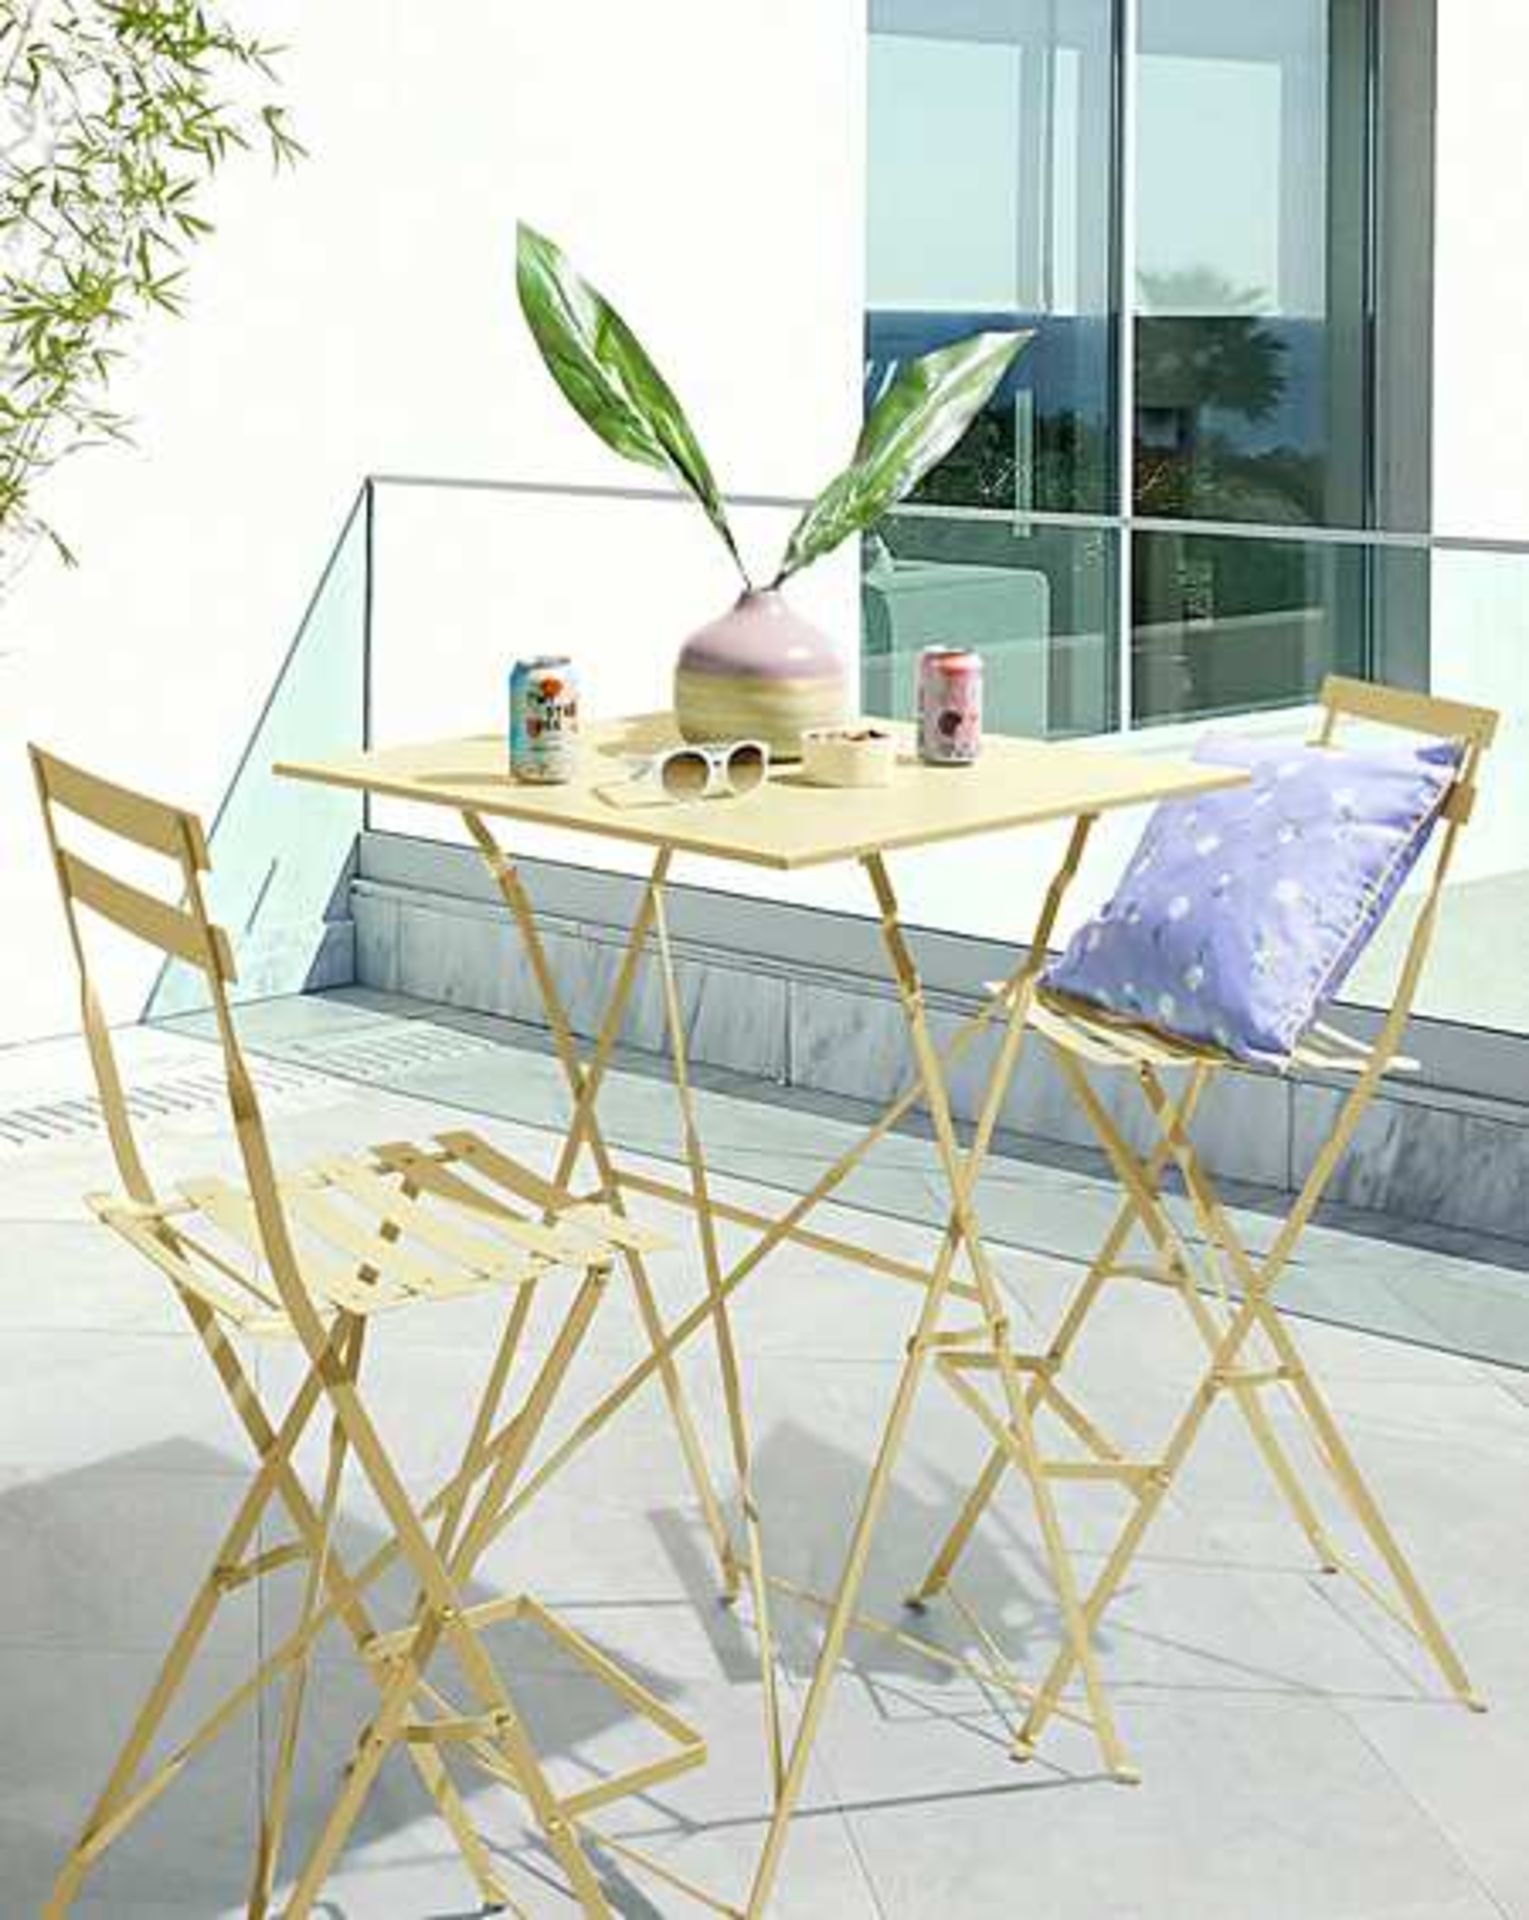 BRAND NEW Palma Bistro Bar Set DUSKY CITRON. RRP £159 EACH. Liven up your garden or balcony with